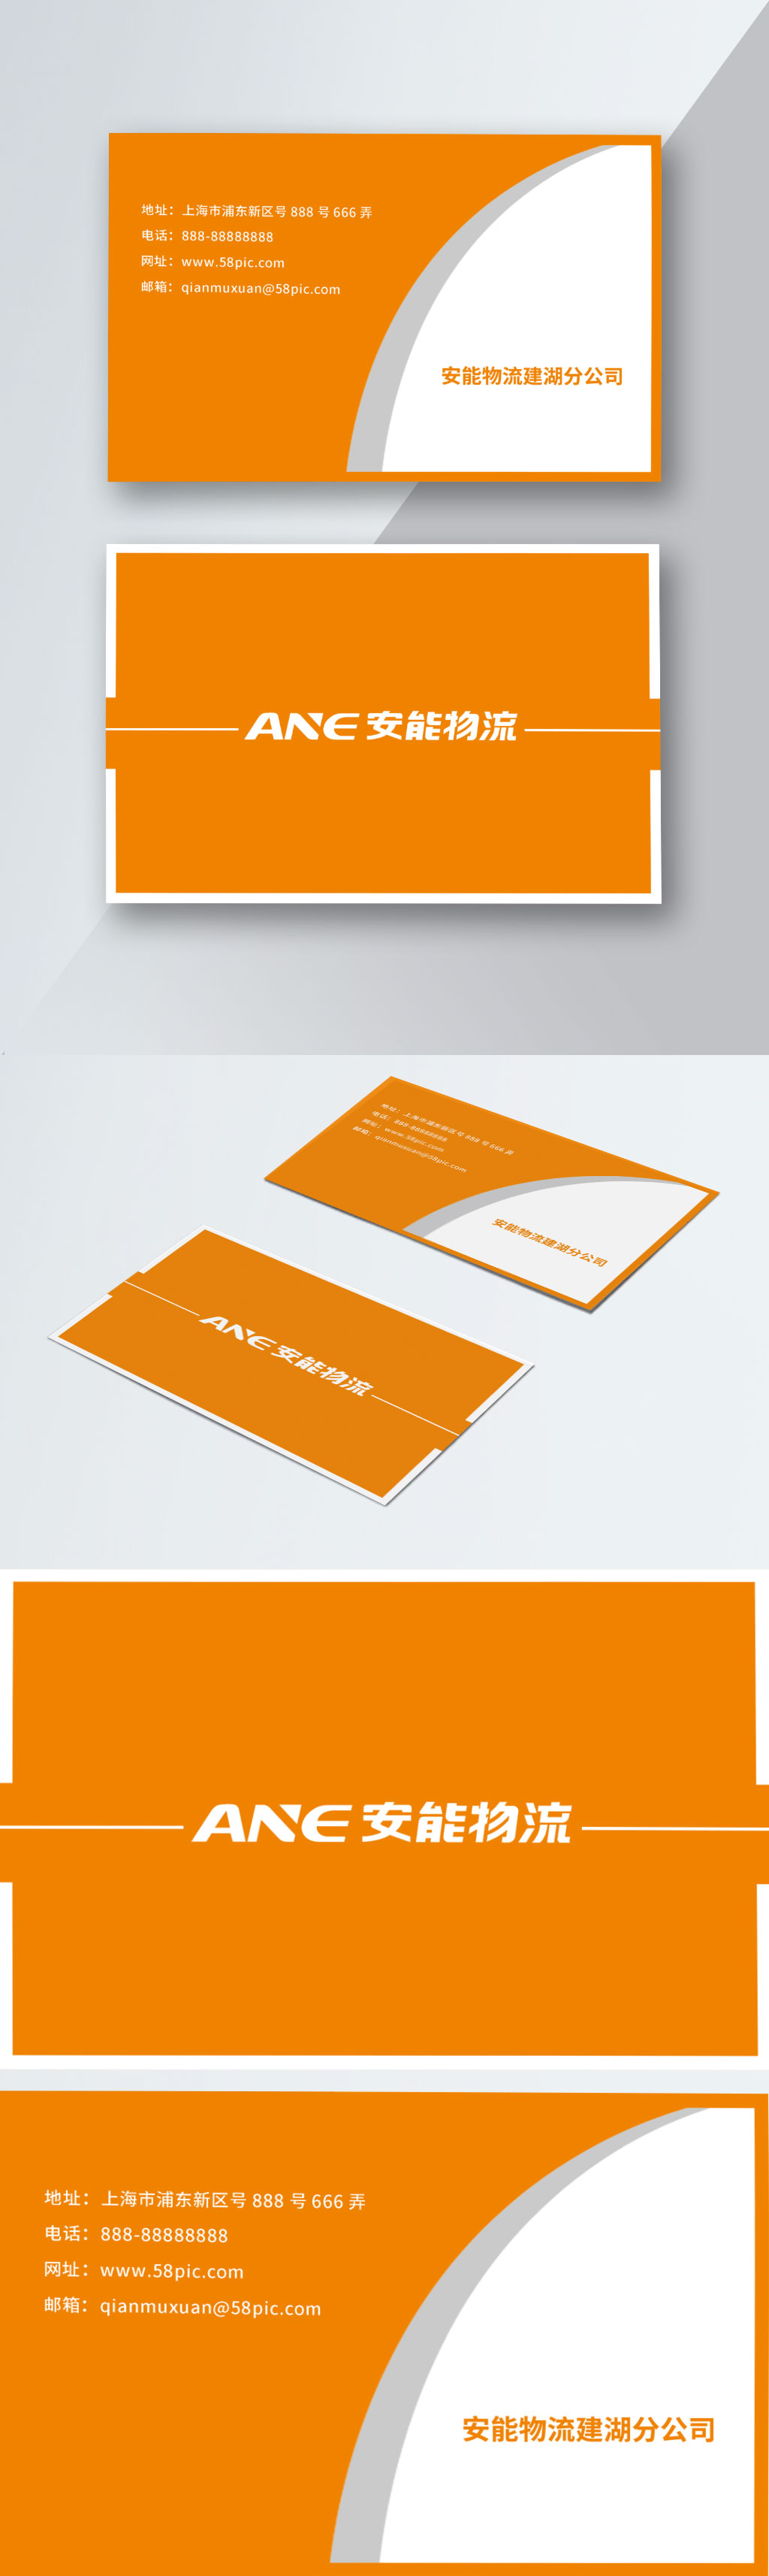 aneng-logistics-business-card-template-image-picture-free-download